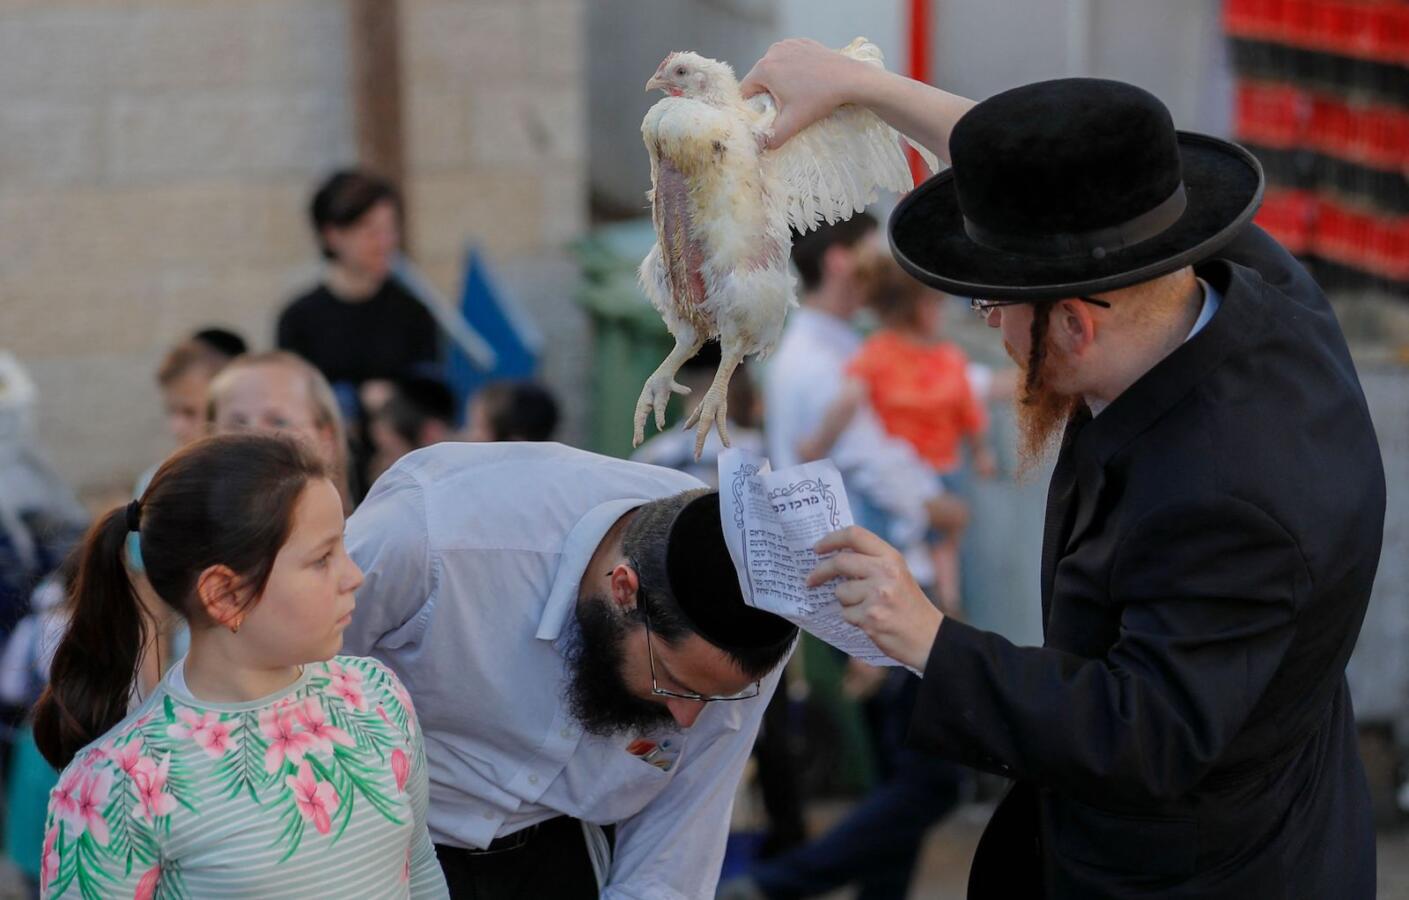 An ultra-Orthodox Jew swings a chicken over the head of a member of their family as they perform the Kapparot ceremony in an ultra-Orthodox neighbourhood in Jerusalem, on September 14, 2021. - Kapparot is a custom practised by some Jews, in which the sins of a person are symbolically transferred to a fowl, and is performed before Yom Kippur (Day of Atonement), the most important day in the Jewish calendar, which will start this year at sunset on September 15. (Photo by AHMAD GHARABLI / AFP) (Photo by AHMAD GHARABLI/AFP via Getty Images)